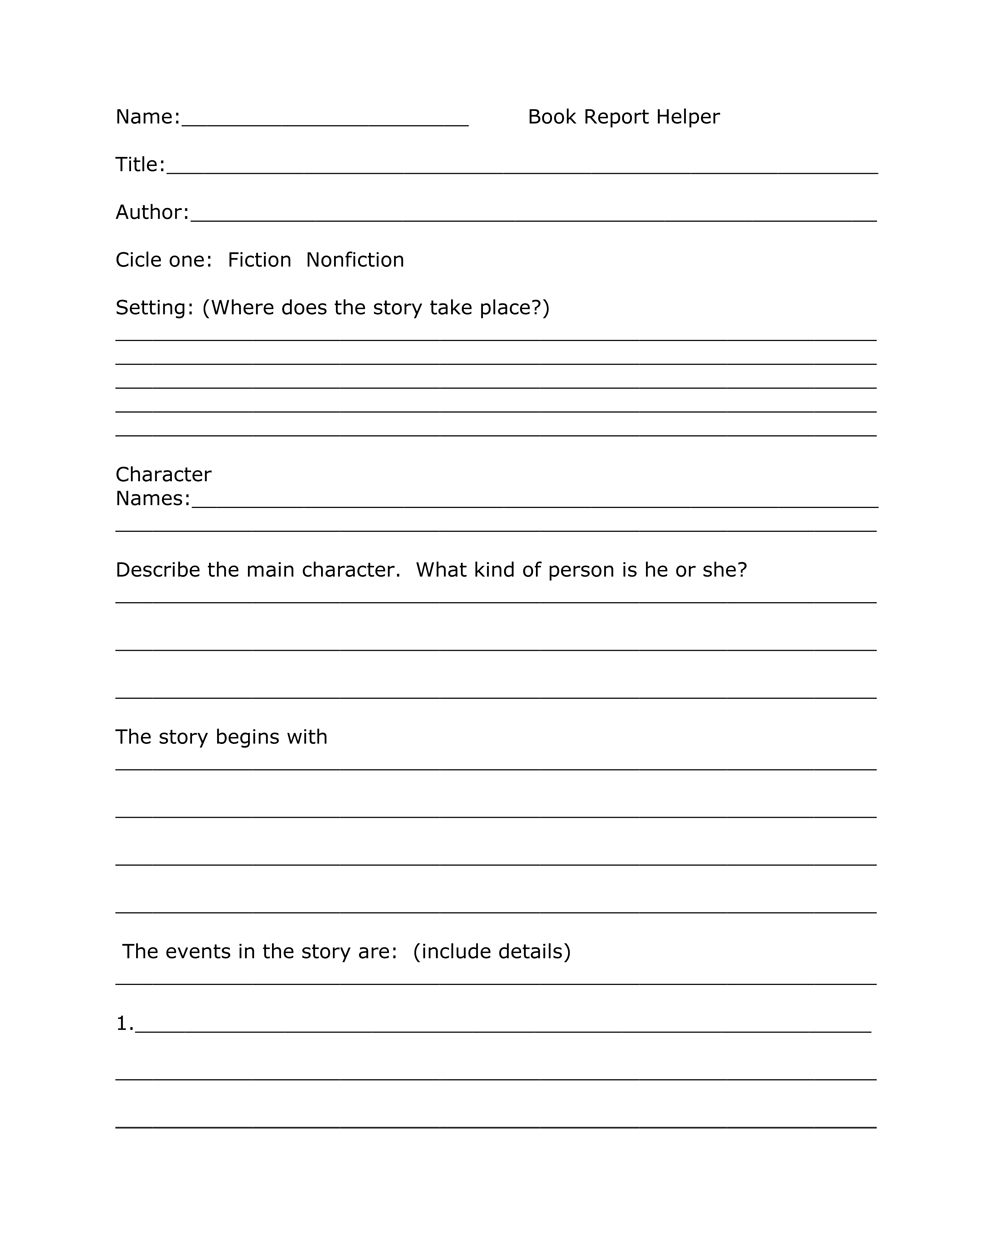 Book Report Templates From Custom Writing Service Regarding One Page Book Report Template